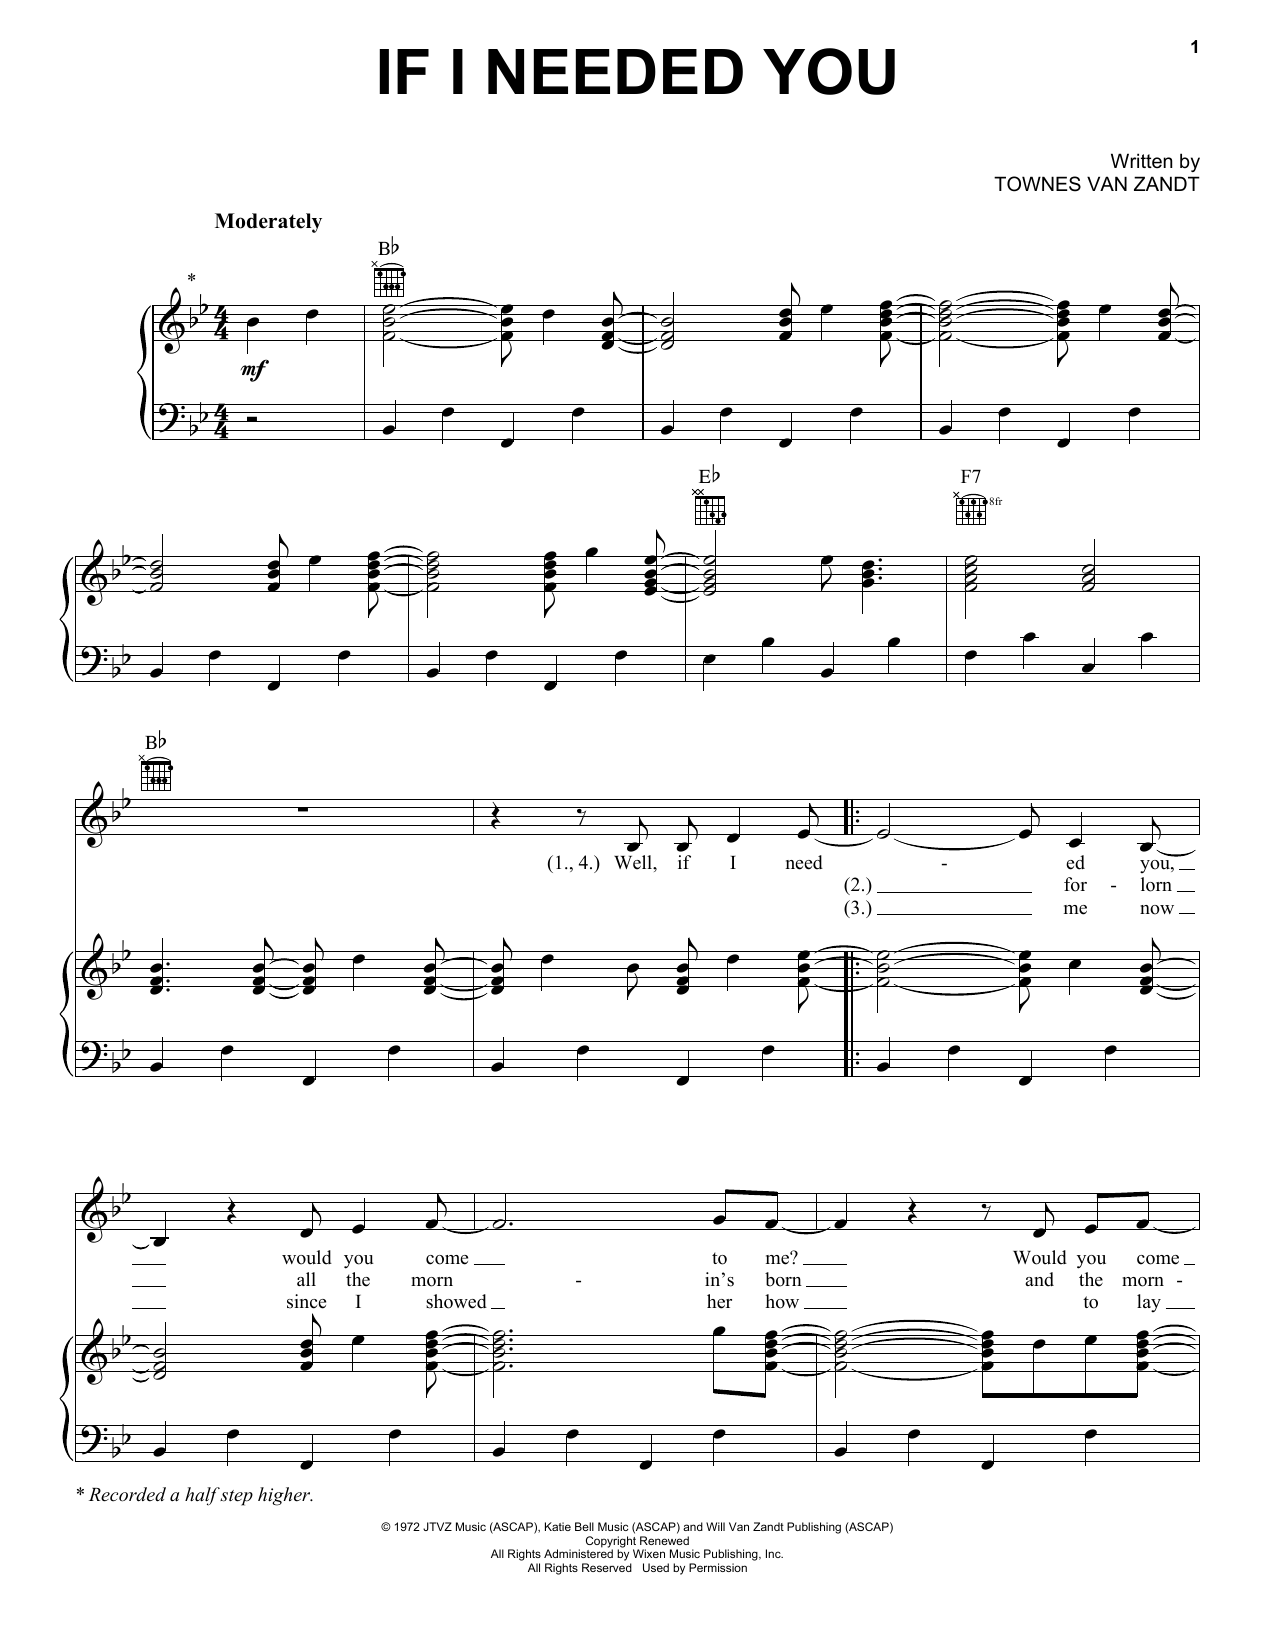 Townes Van Zandt If I Needed You sheet music preview music notes and score for Piano, Vocal & Guitar (Right-Hand Melody) including 2 page(s)